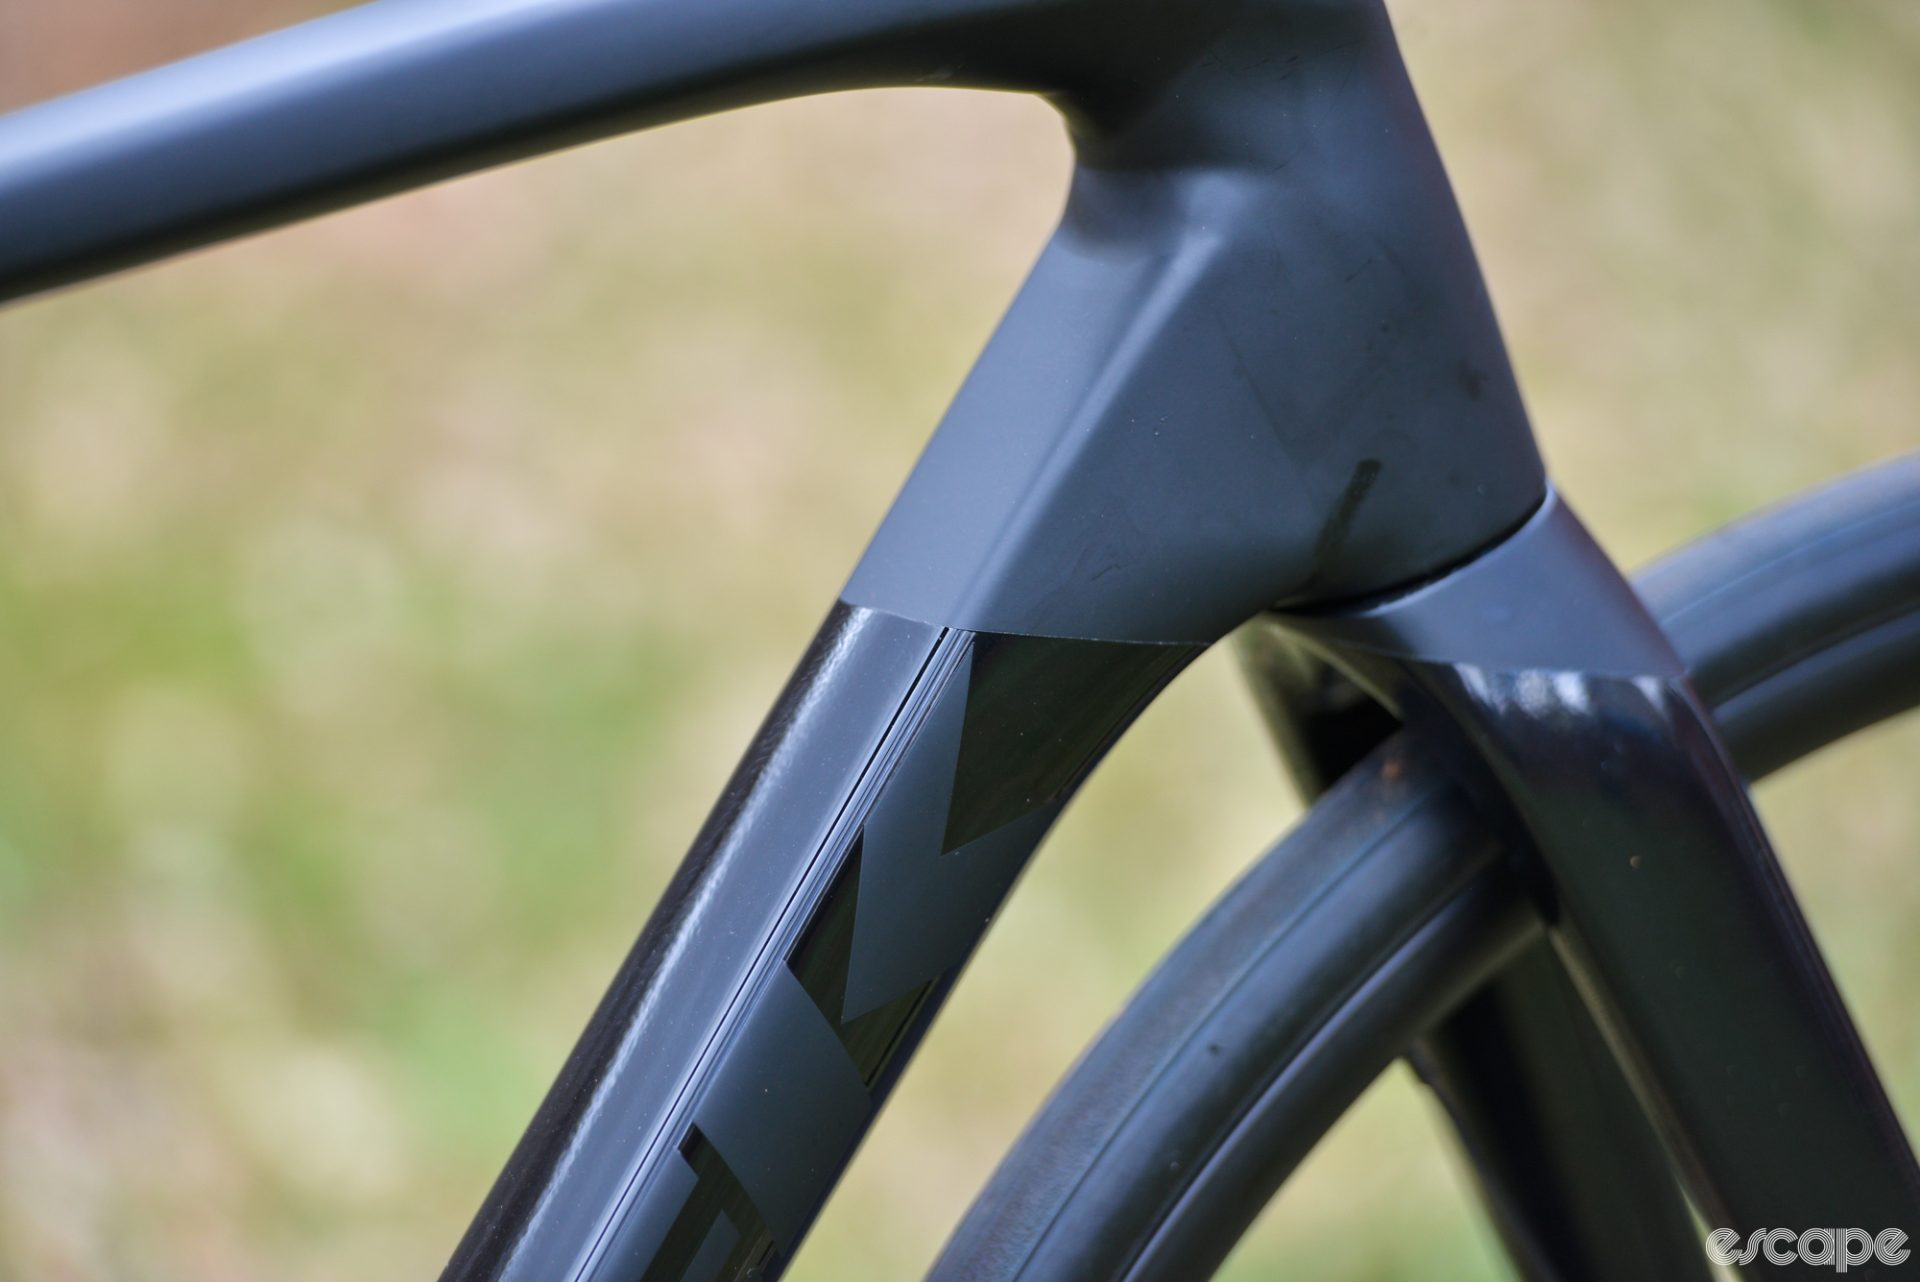 Trek's Invisible Weld Technology shows smooth transitions from the down tube to head tube, with almost no visible weld puddles - again, could pass for carbon.